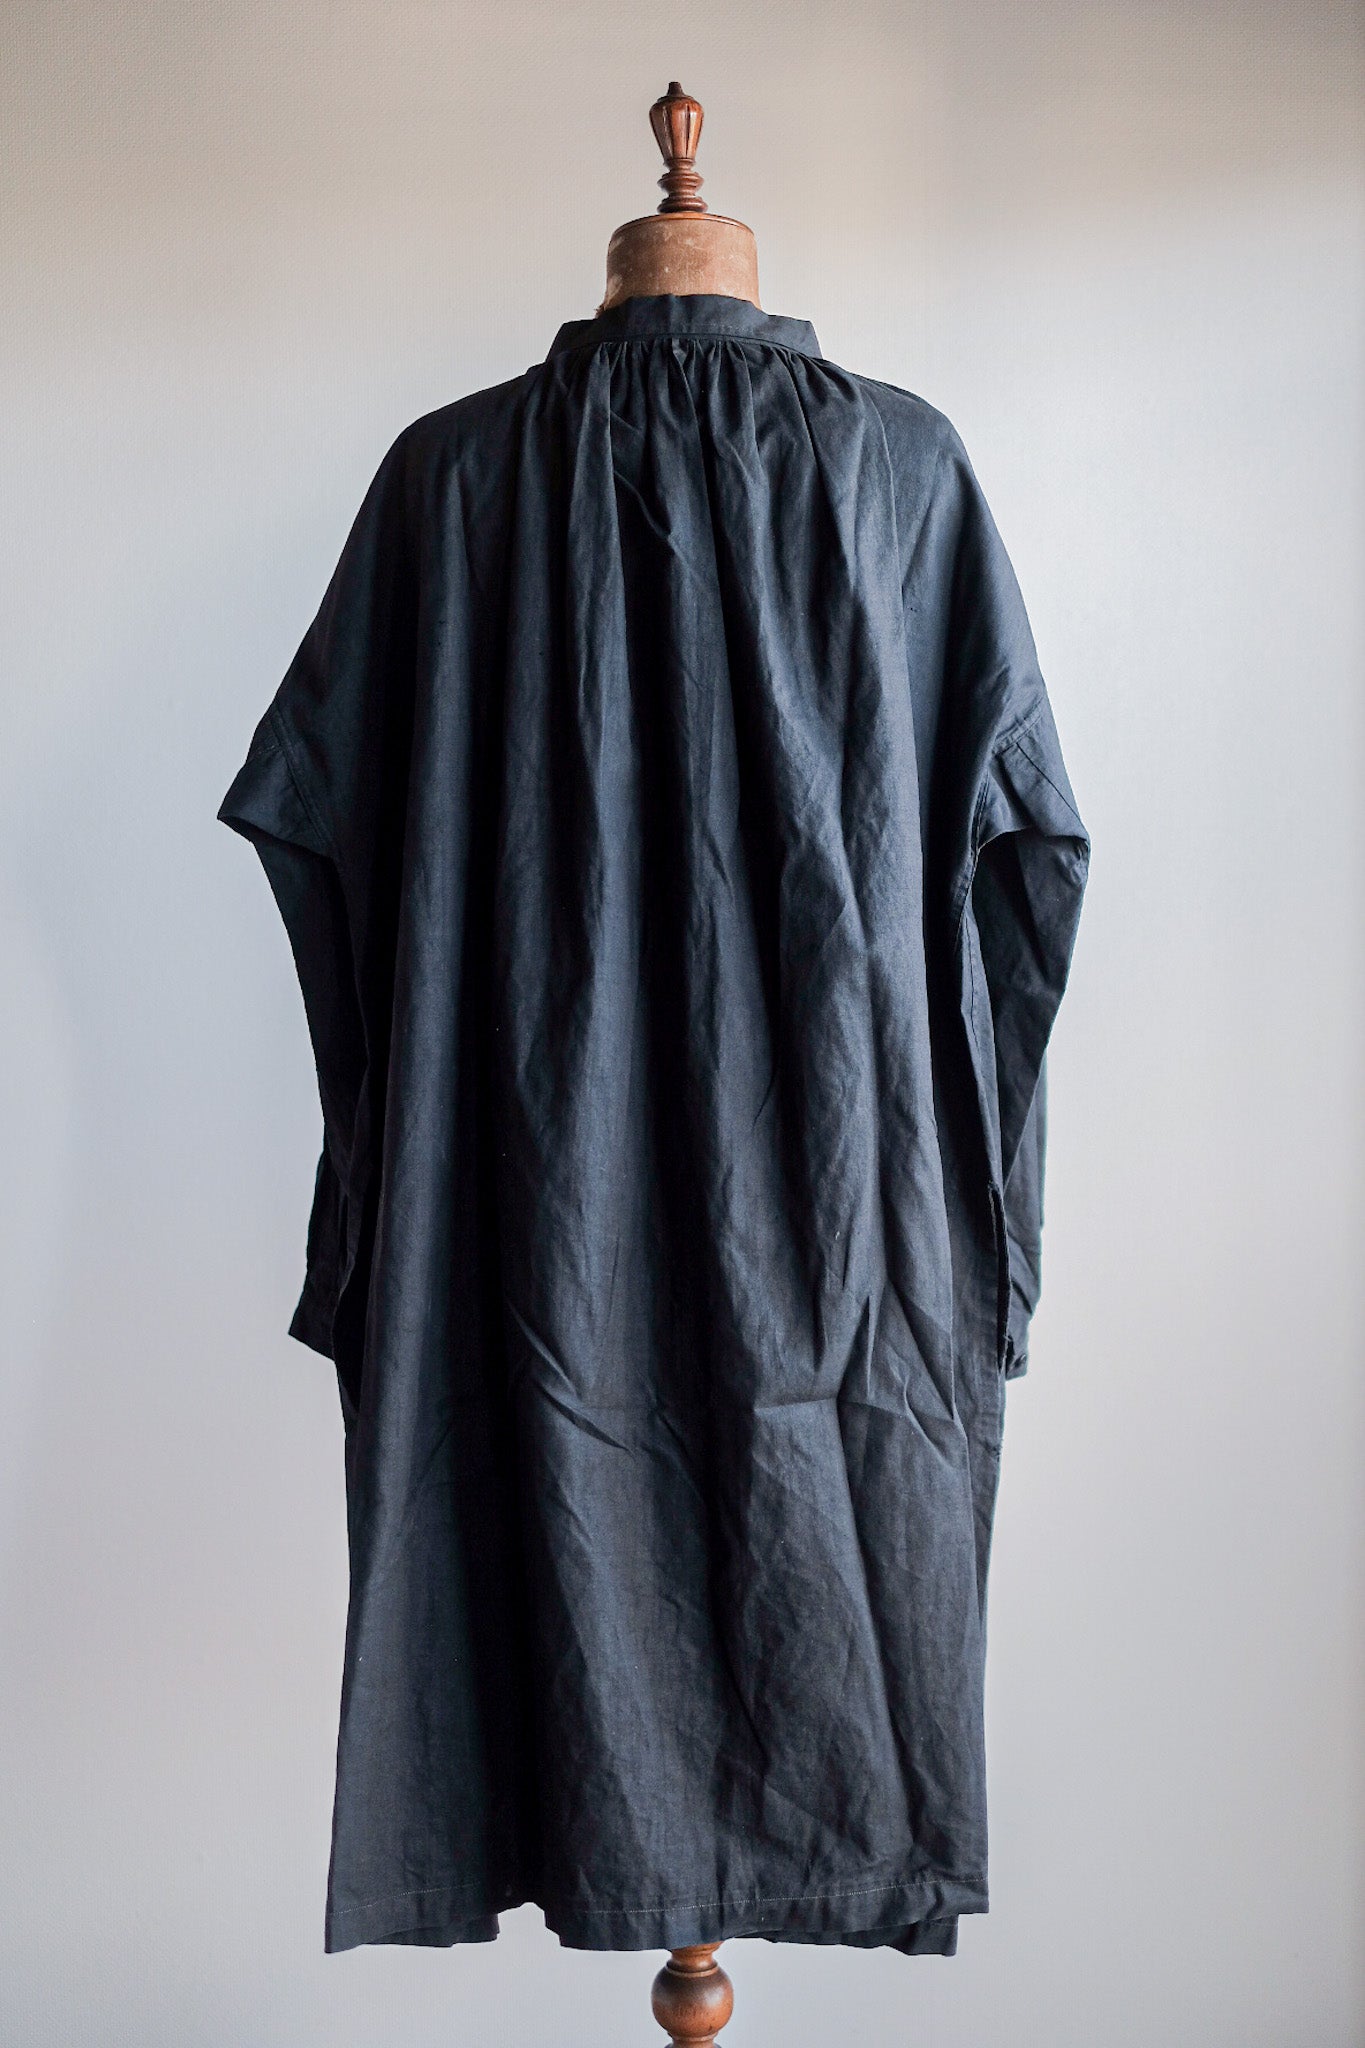 [Early 20th C] French Antique Black Linen Smock "Biaude"